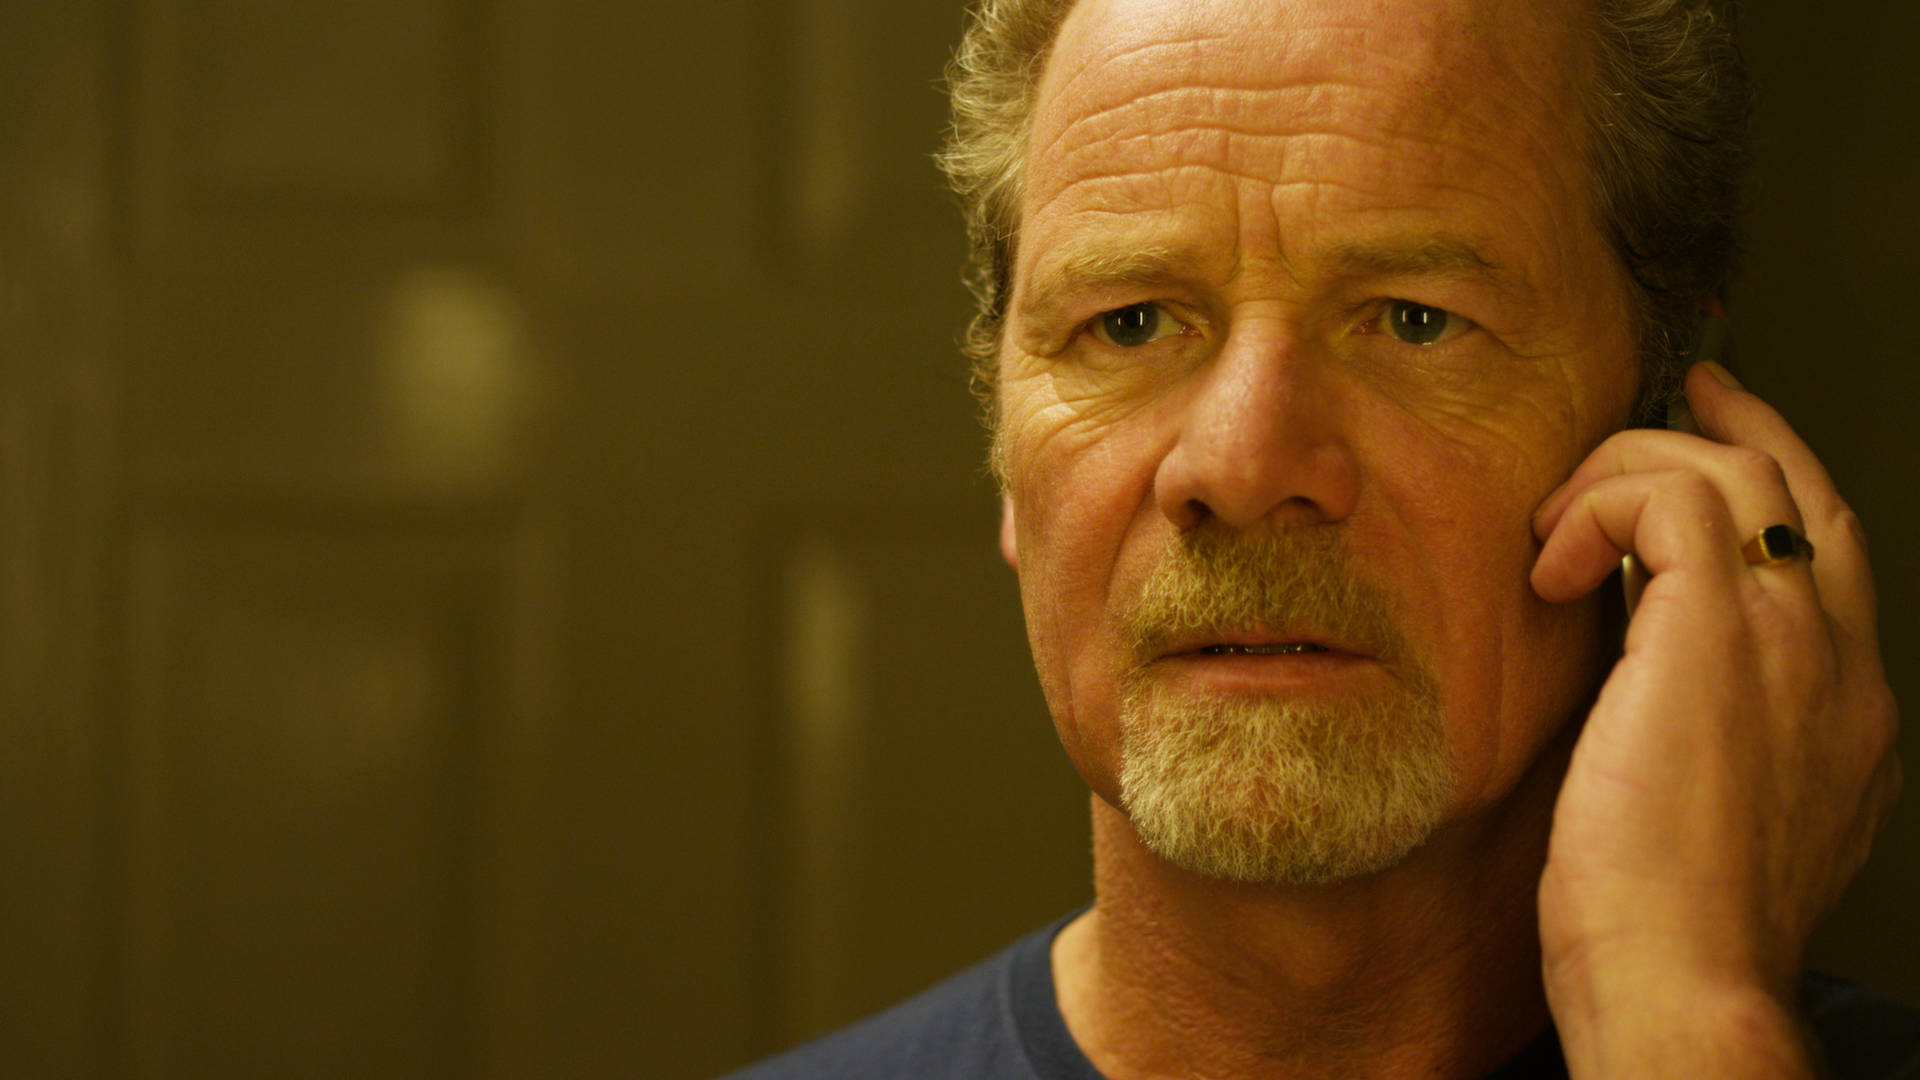 Peter Mullan captivating in "The Liability" Wallpaper